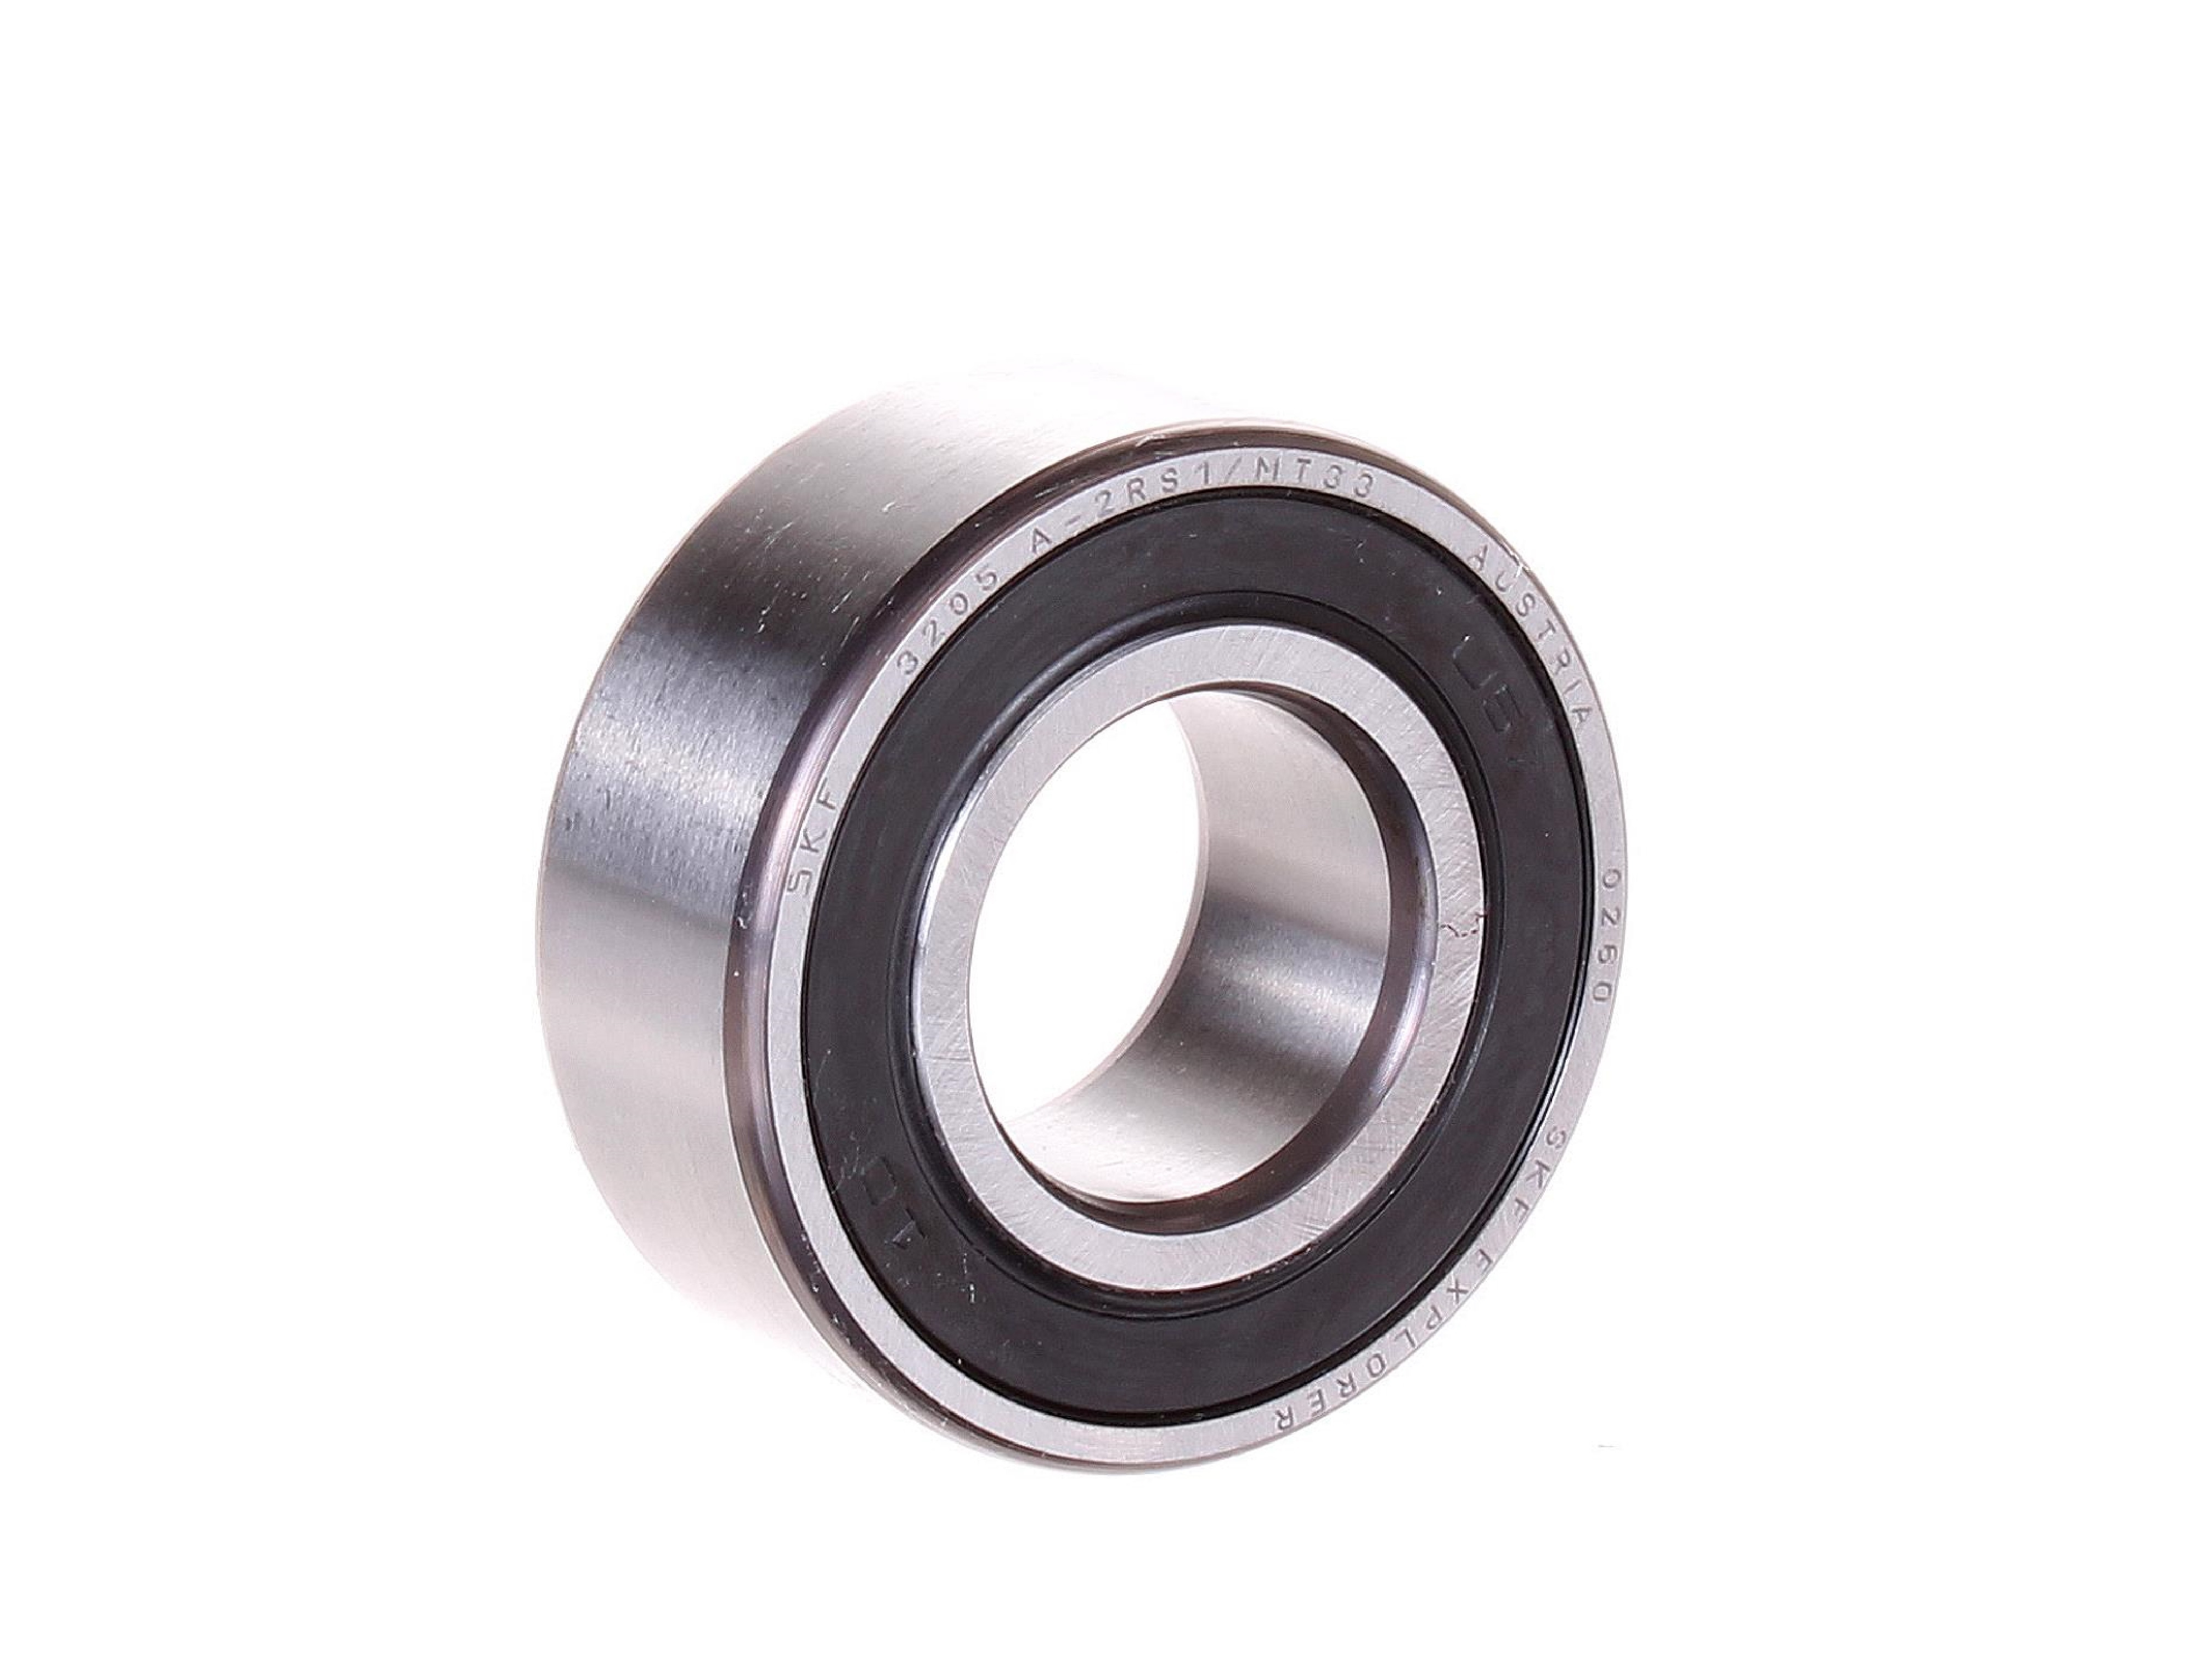 3311A-2RS1/C3MT33 SKF Double Row Angular Contact Ball Bearing - Sealed 55mm x 120mm x 49.2mm